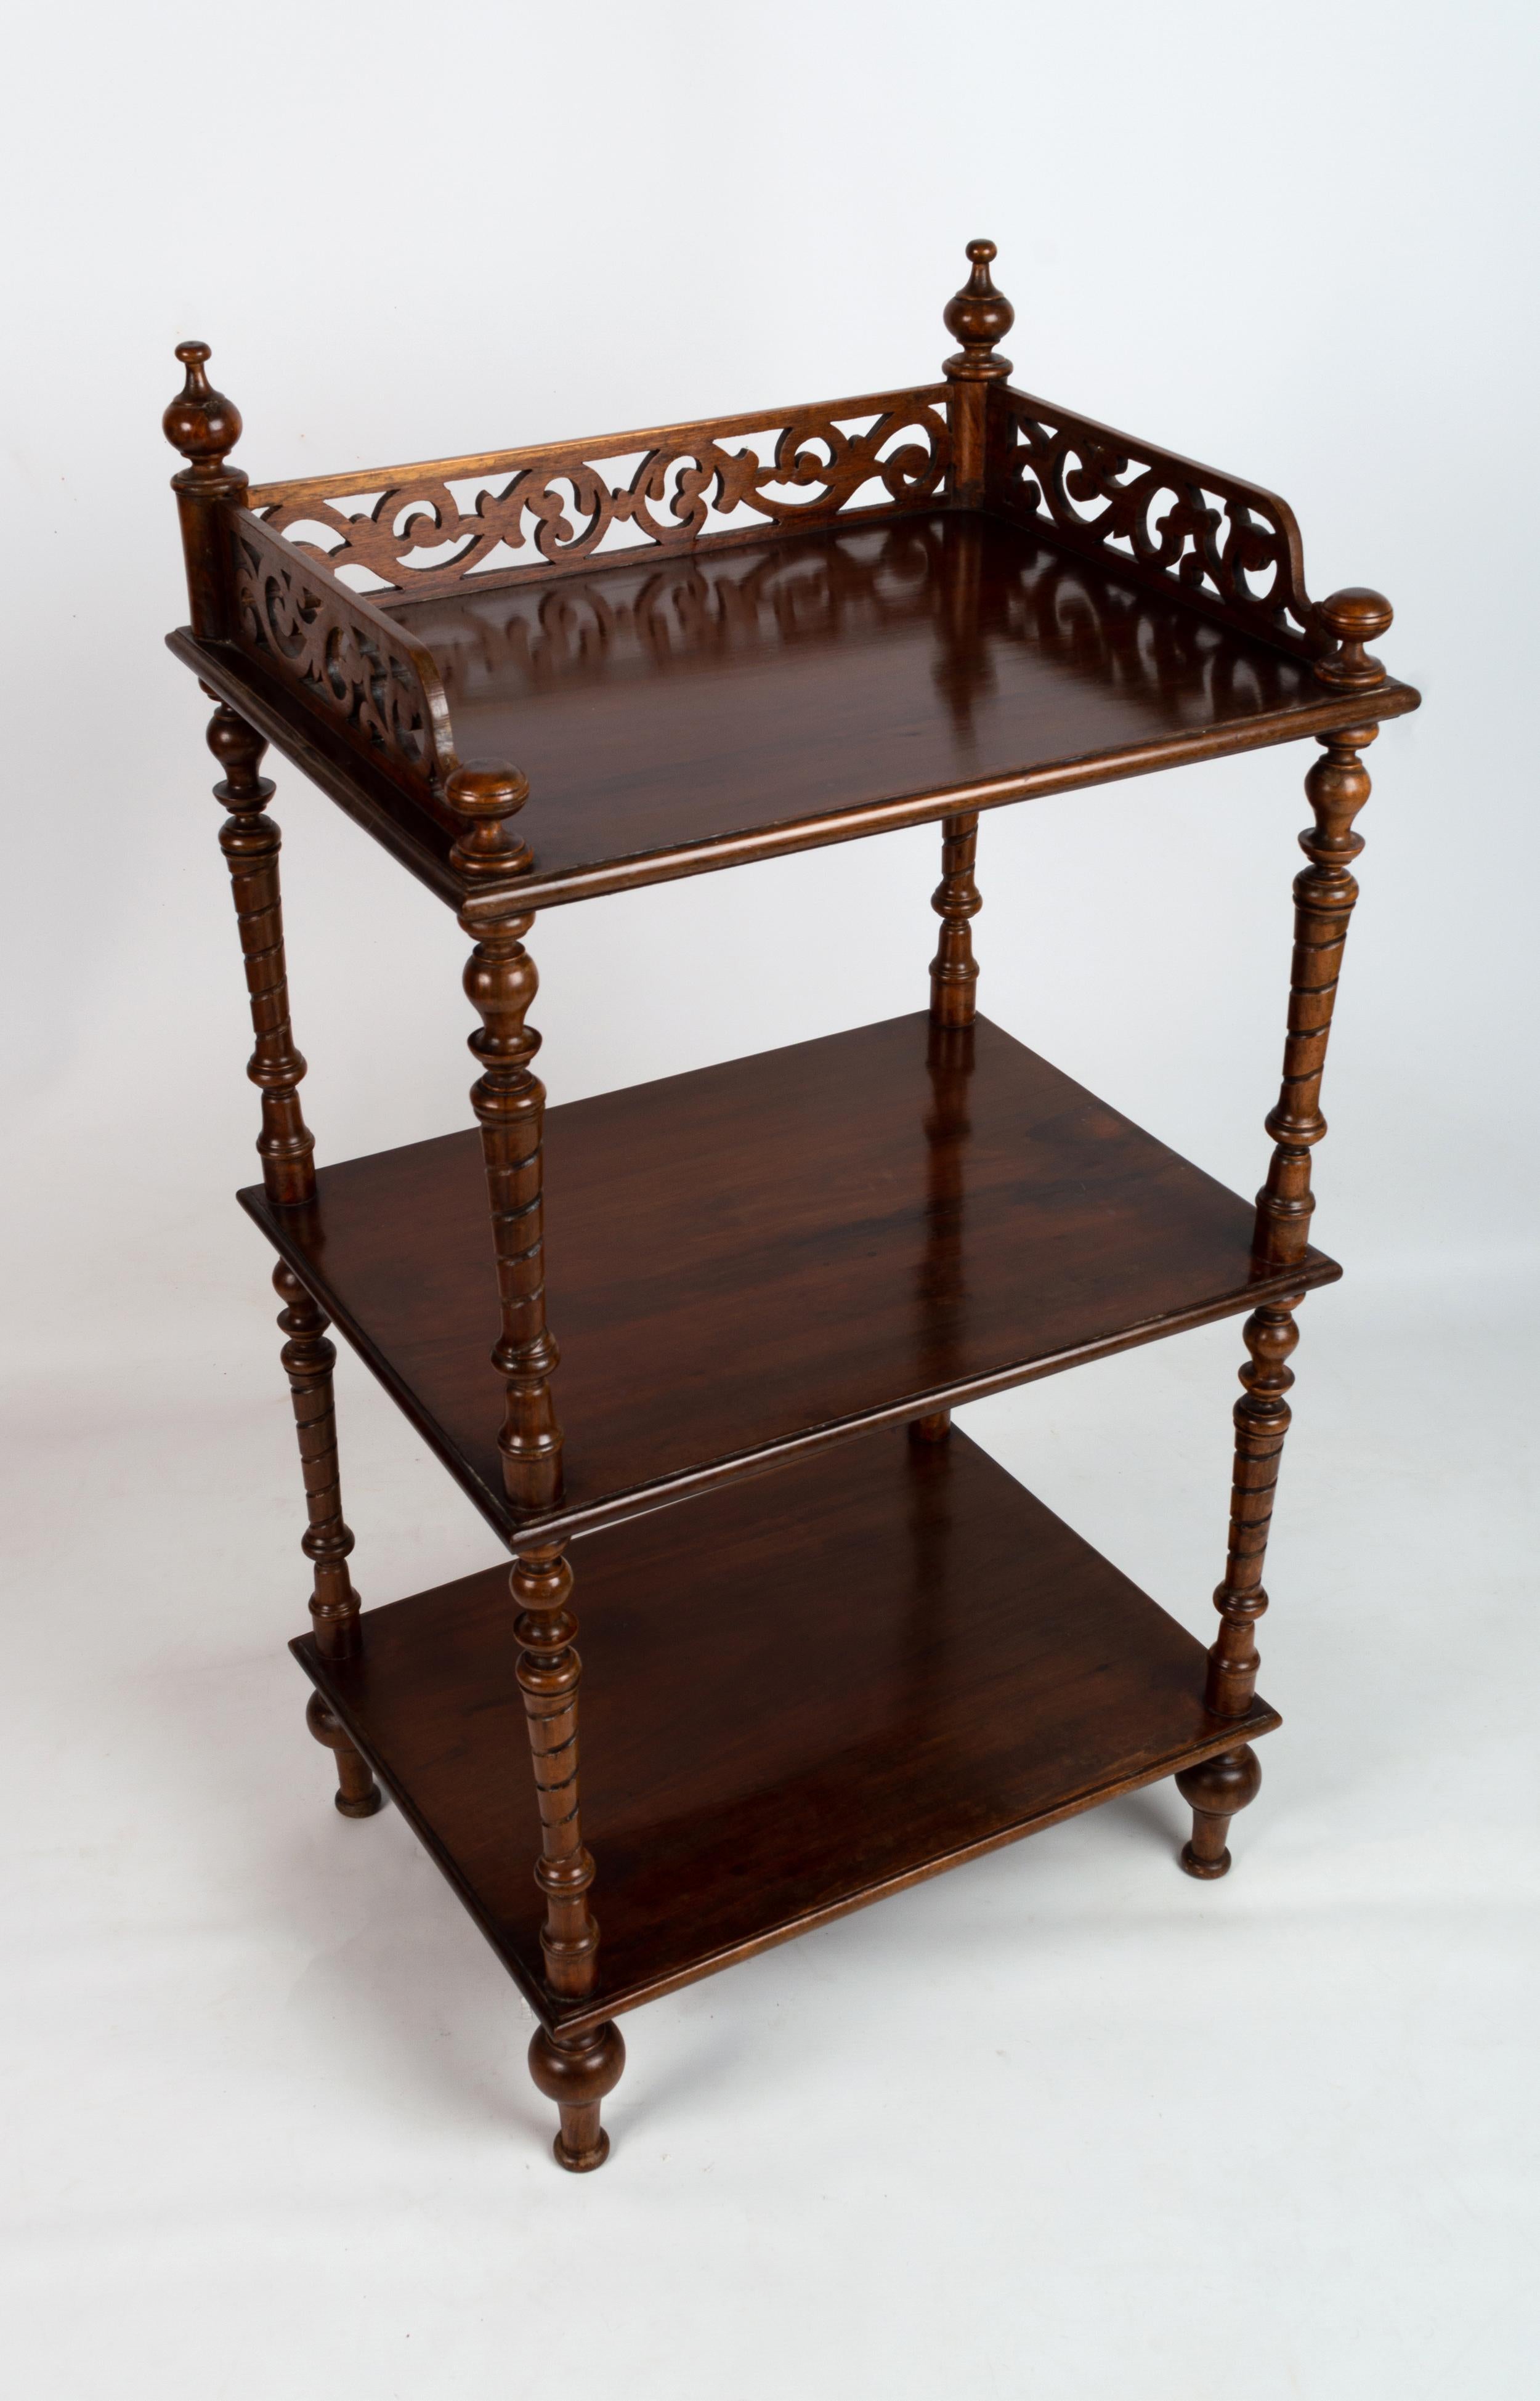 Antique English Victorian carved mahogany whatnot Etagere C.1880

A late Victorian mahogany whatnot, of three open tiers, with finials, a fret carved three quarter gallery, twist carved columns, on turned feet and castors.

A superb example, in